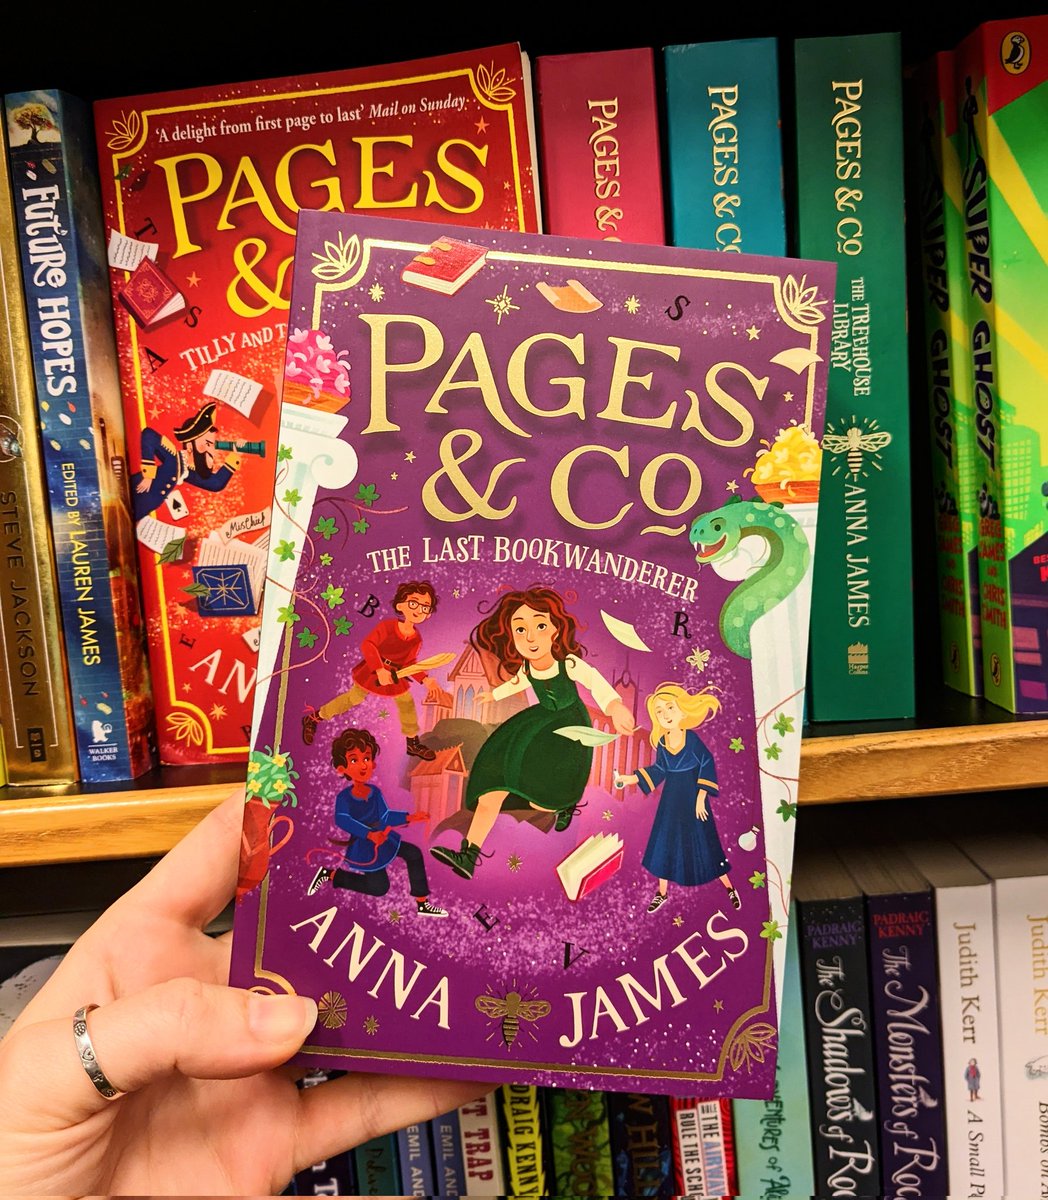 The finale of the truly magical, literary and lovely Pages & Co series, The Last Bookwanderer, is out now in paperback! 💜 @acaseforbooks @HarperCollinsCh